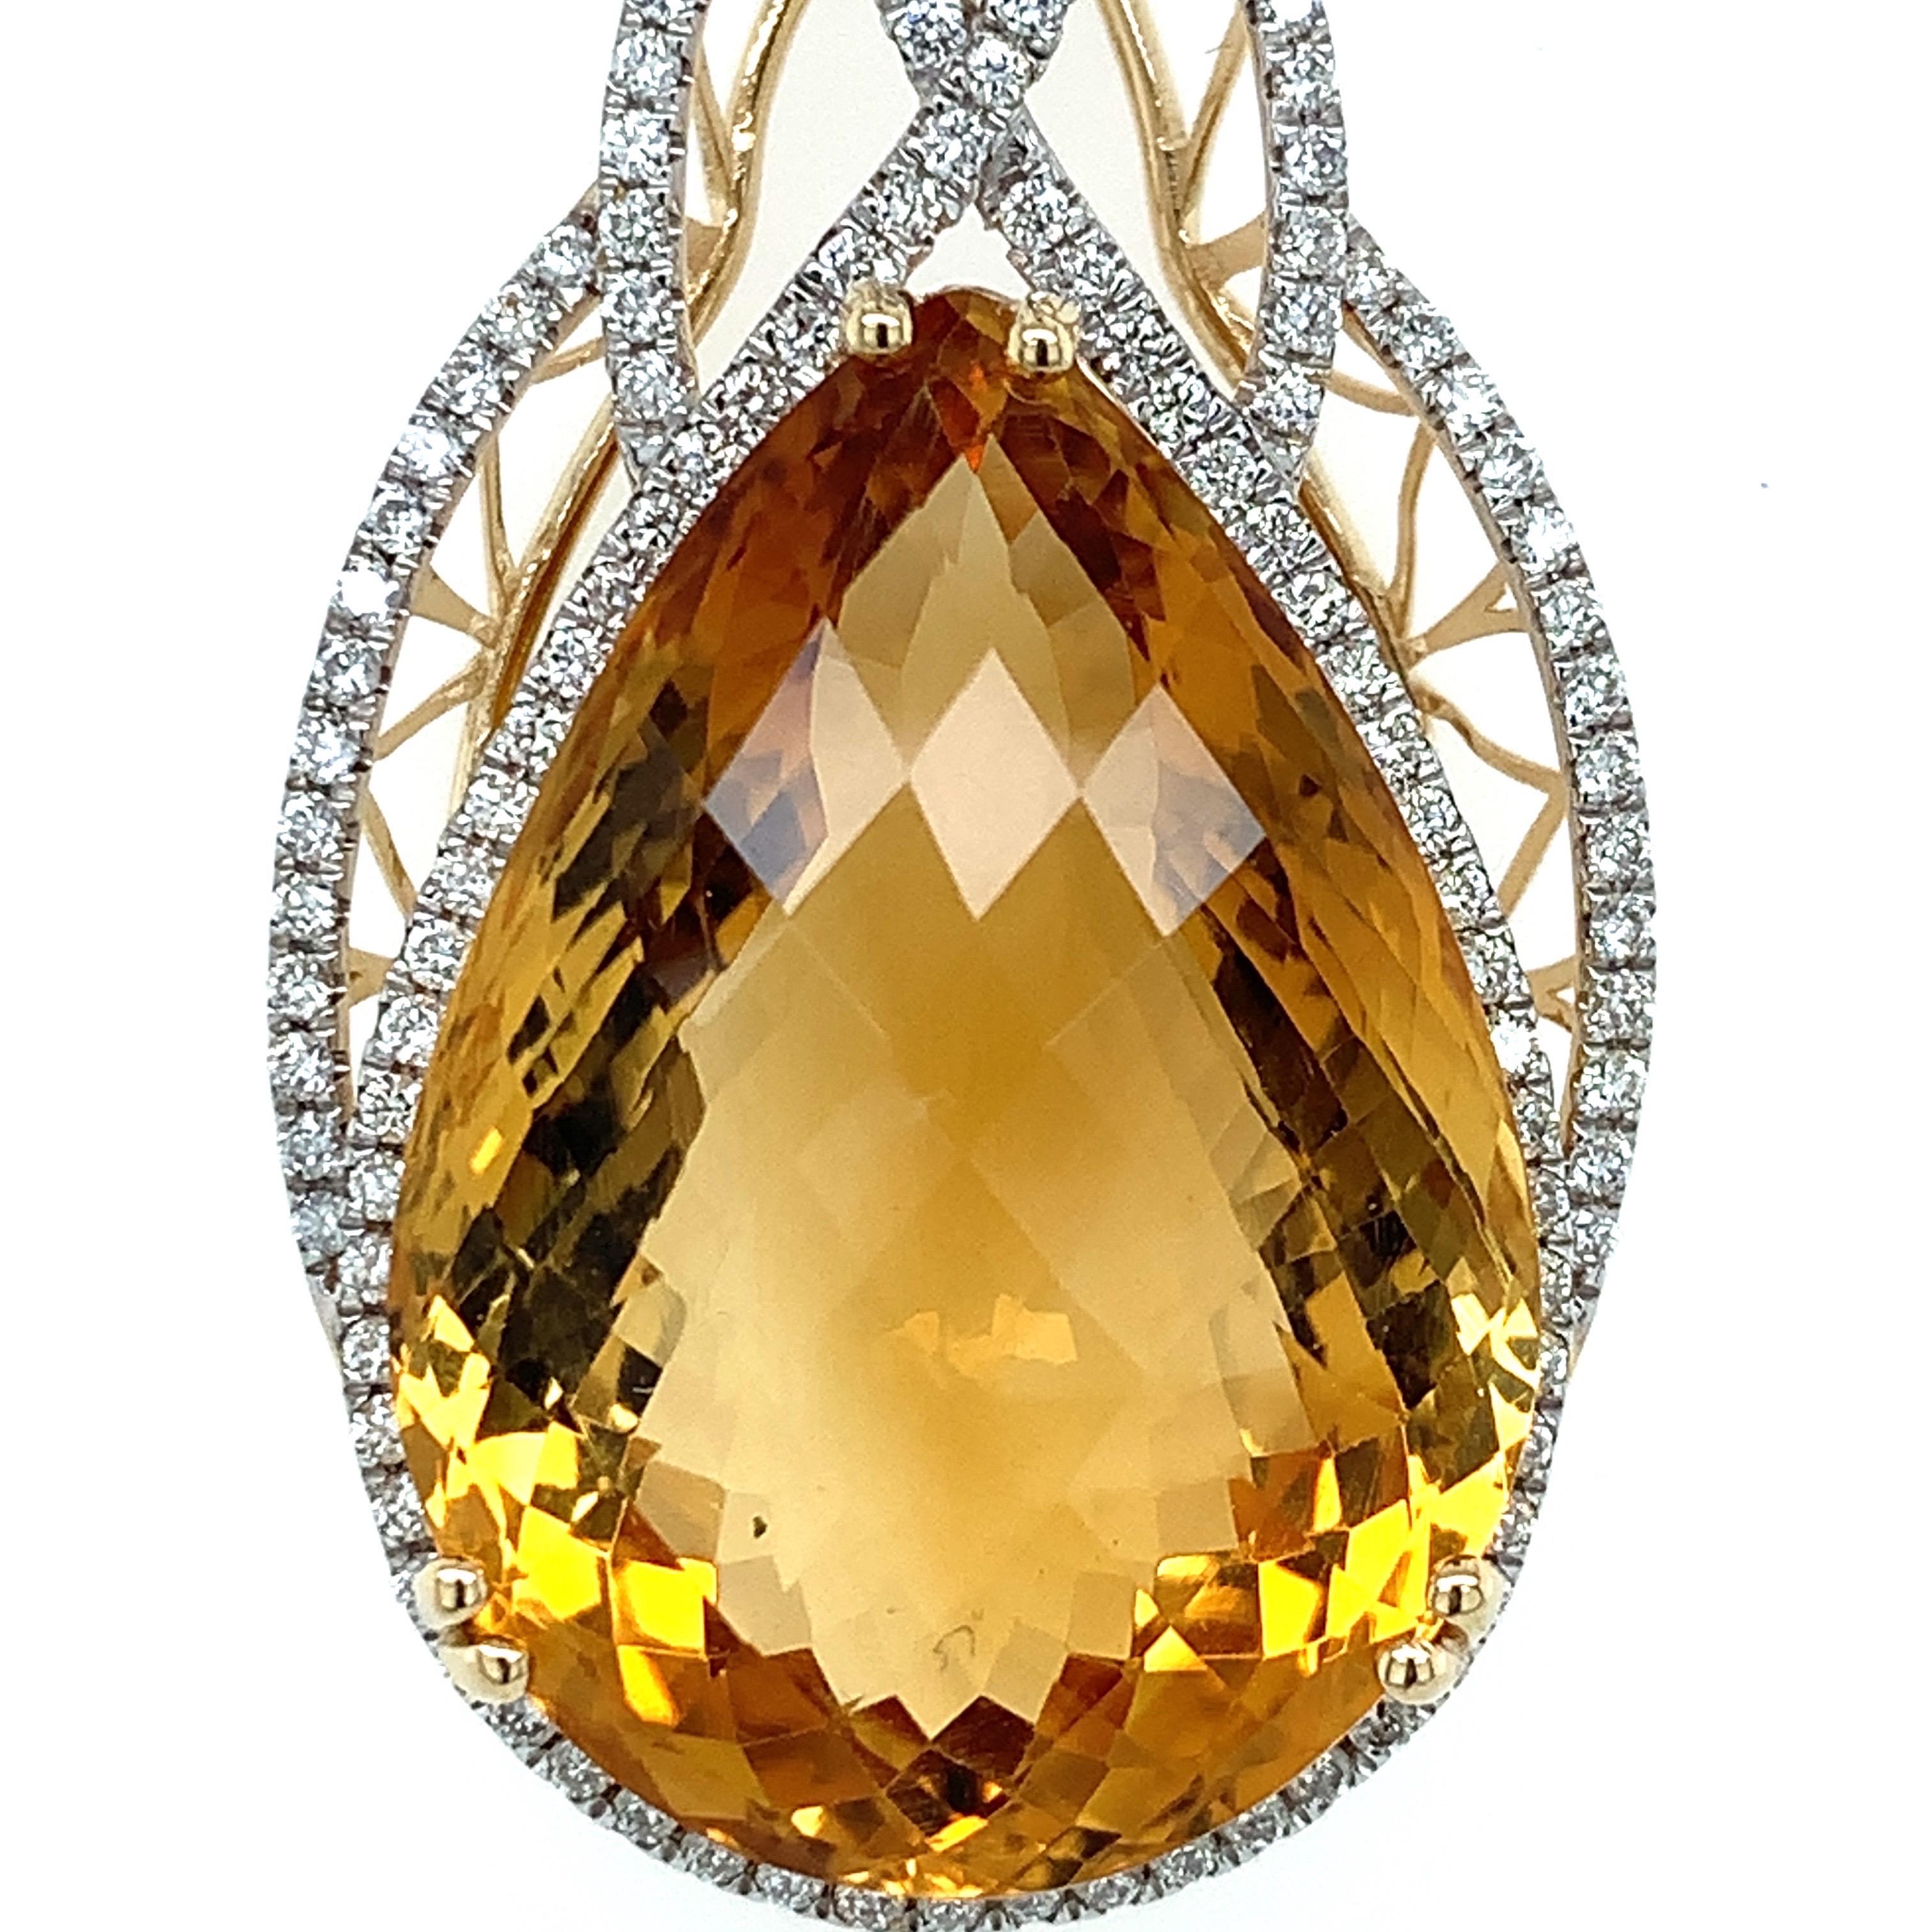 Glamorous design. High brilliance, checkerboard, pear shape faceted, rich golden honey tone natural 25 carat citrine, mounted in high profile open basket with six bead prongs, accented with round brilliant cut diamonds. Handcrafted design set in 14